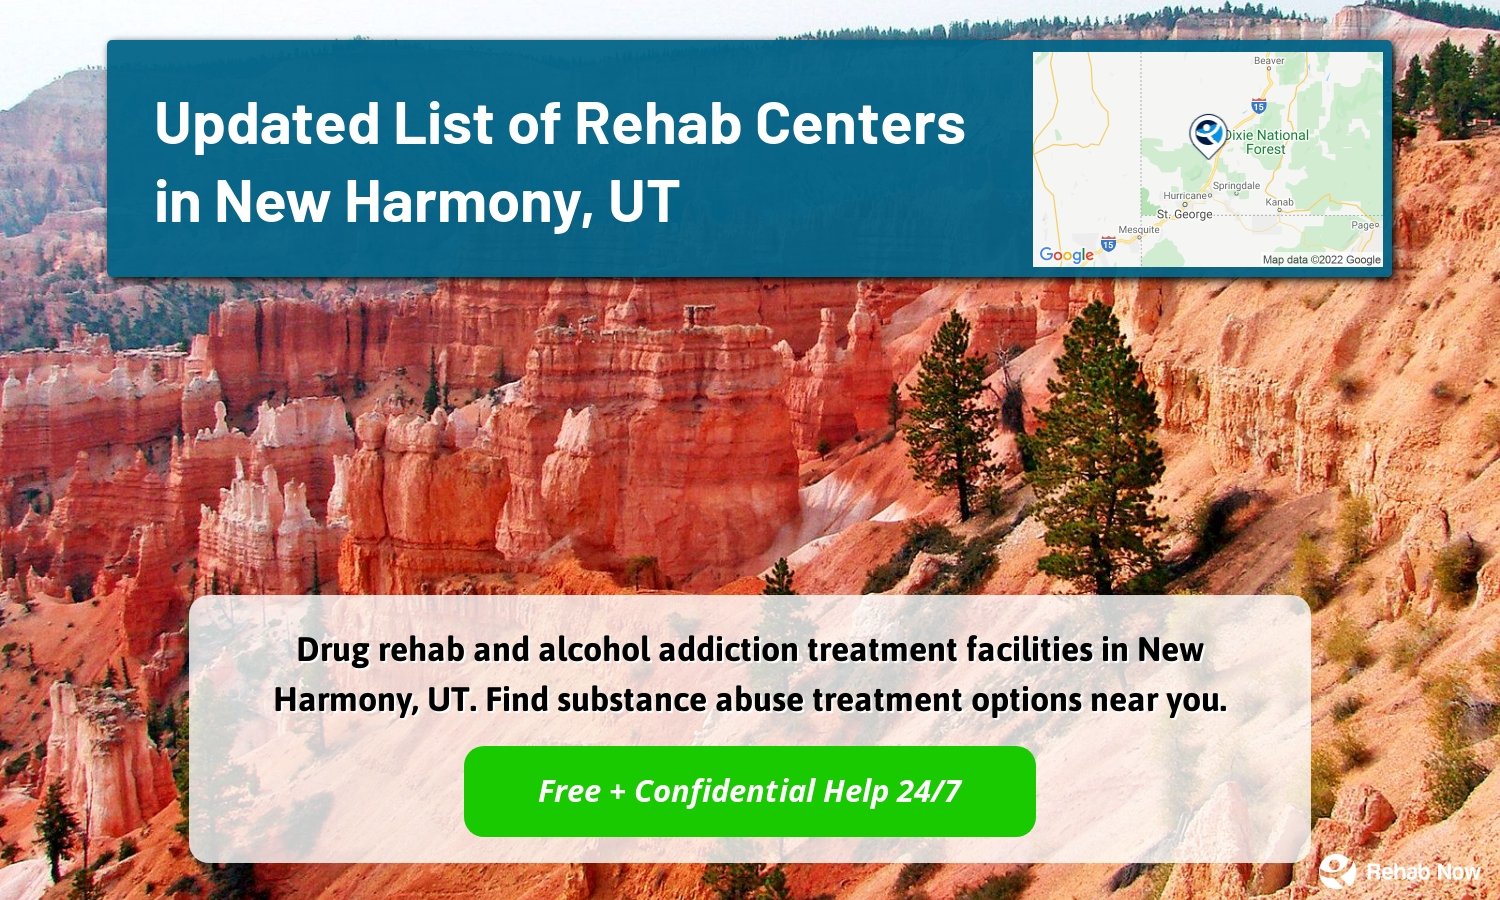 Drug rehab and alcohol addiction treatment facilities in New Harmony, UT. Find substance abuse treatment options near you.